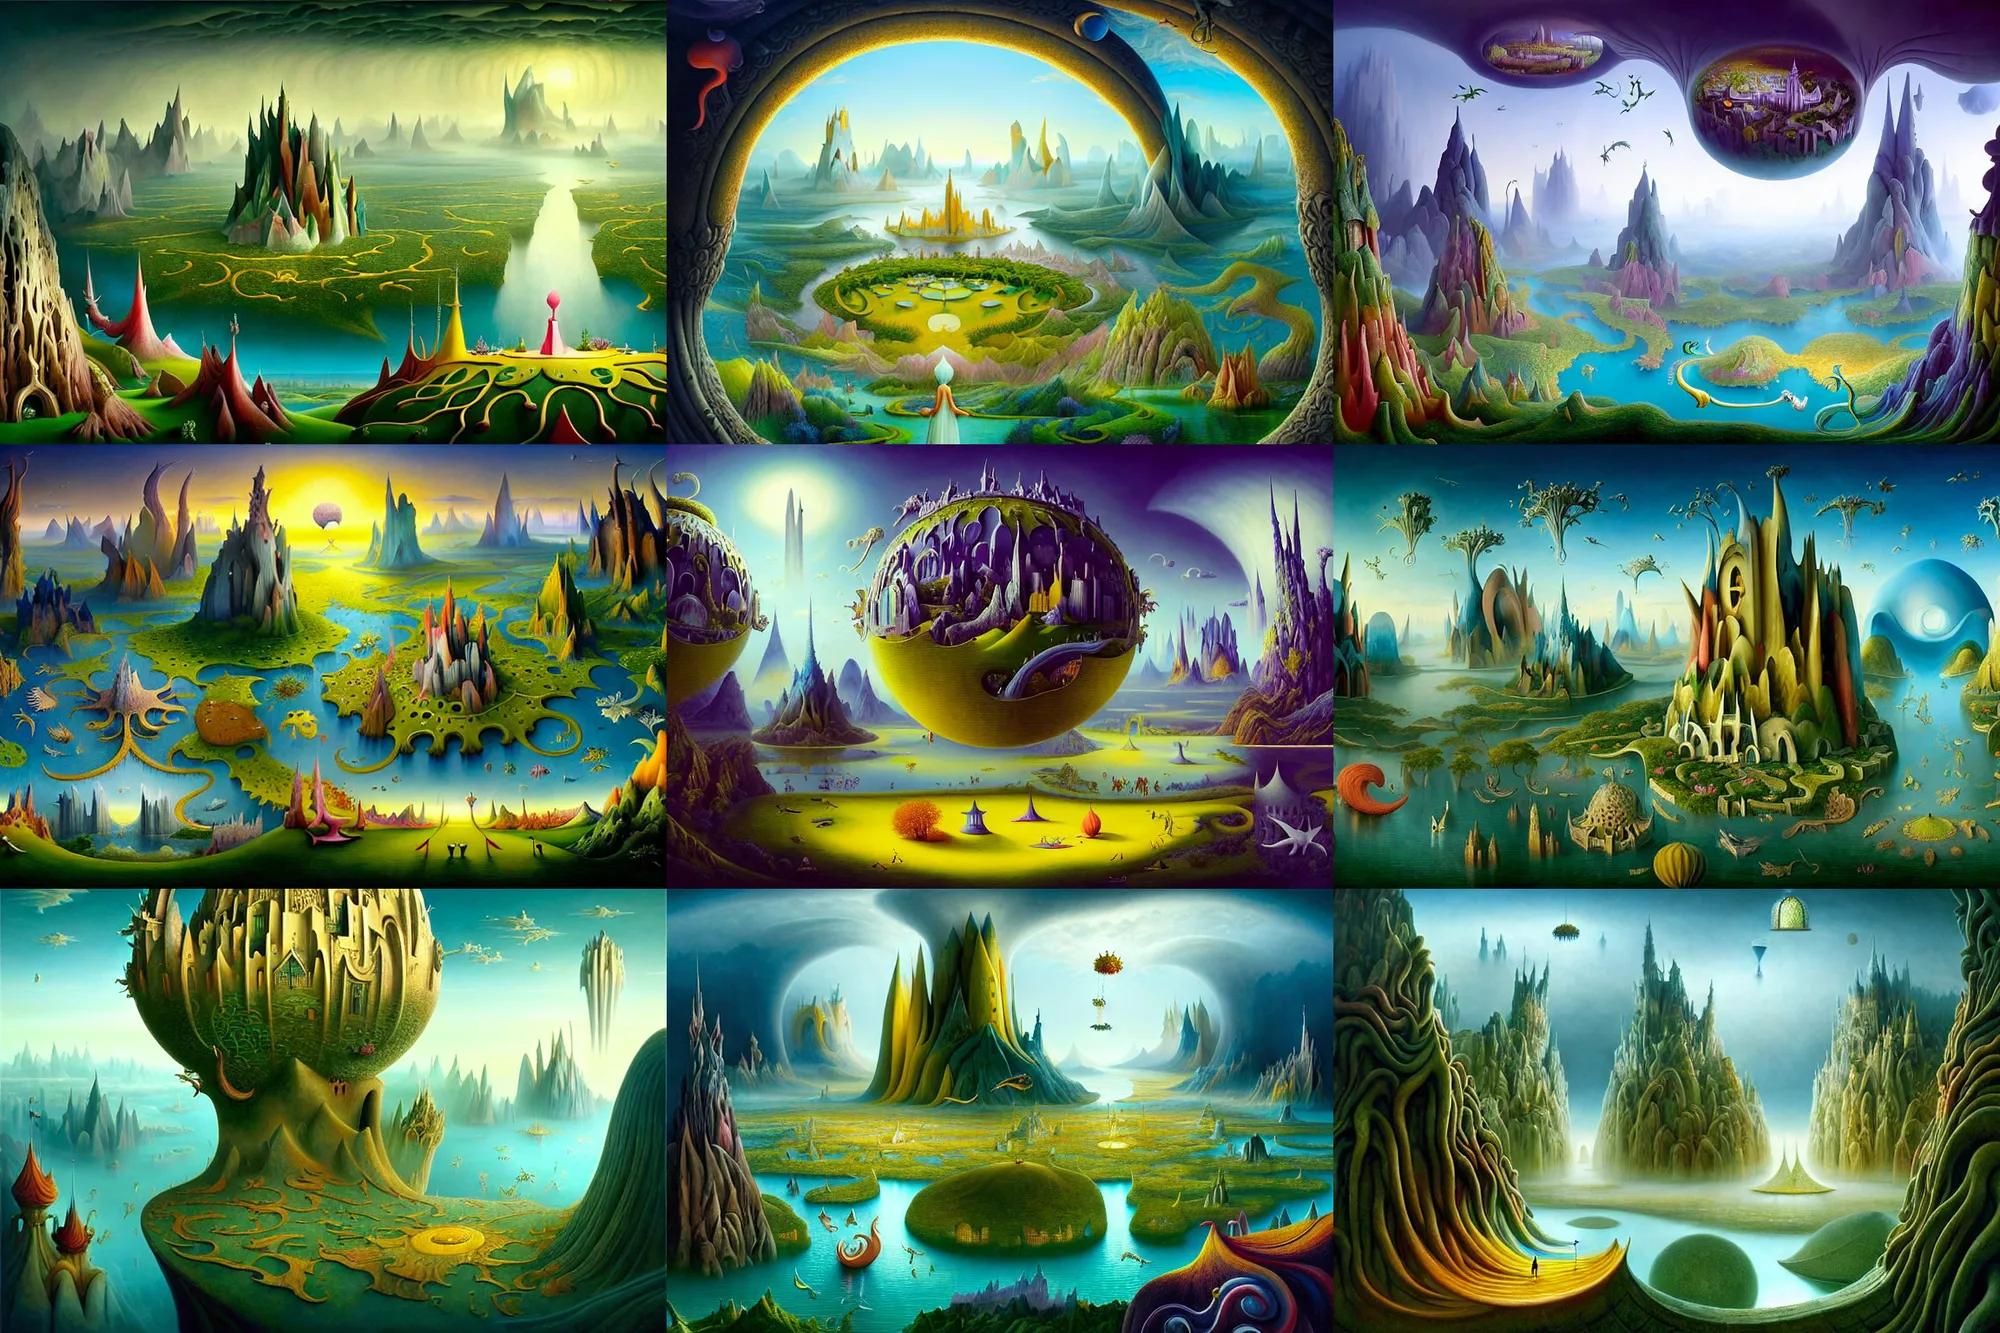 Prompt: a beguiling epic stunning beautiful and insanely detailed matte painting of windows into dream worlds with surreal architecture designed by Heironymous Bosch, dream world populated with mythical whimsical creatures, mega structures inspired by Heironymous Bosch's Garden of Earthly Delights, vast surreal landscape and horizon by Cyril Rolando and Andrew Ferez and Paul Lehr, masterpiece!!!, grand!, imaginative!!!, whimsical!!, epic scale, intricate details, sense of awe, elite, wonder, insanely complex, masterful composition!!!, sharp focus, fantasy realism, dramatic lighting